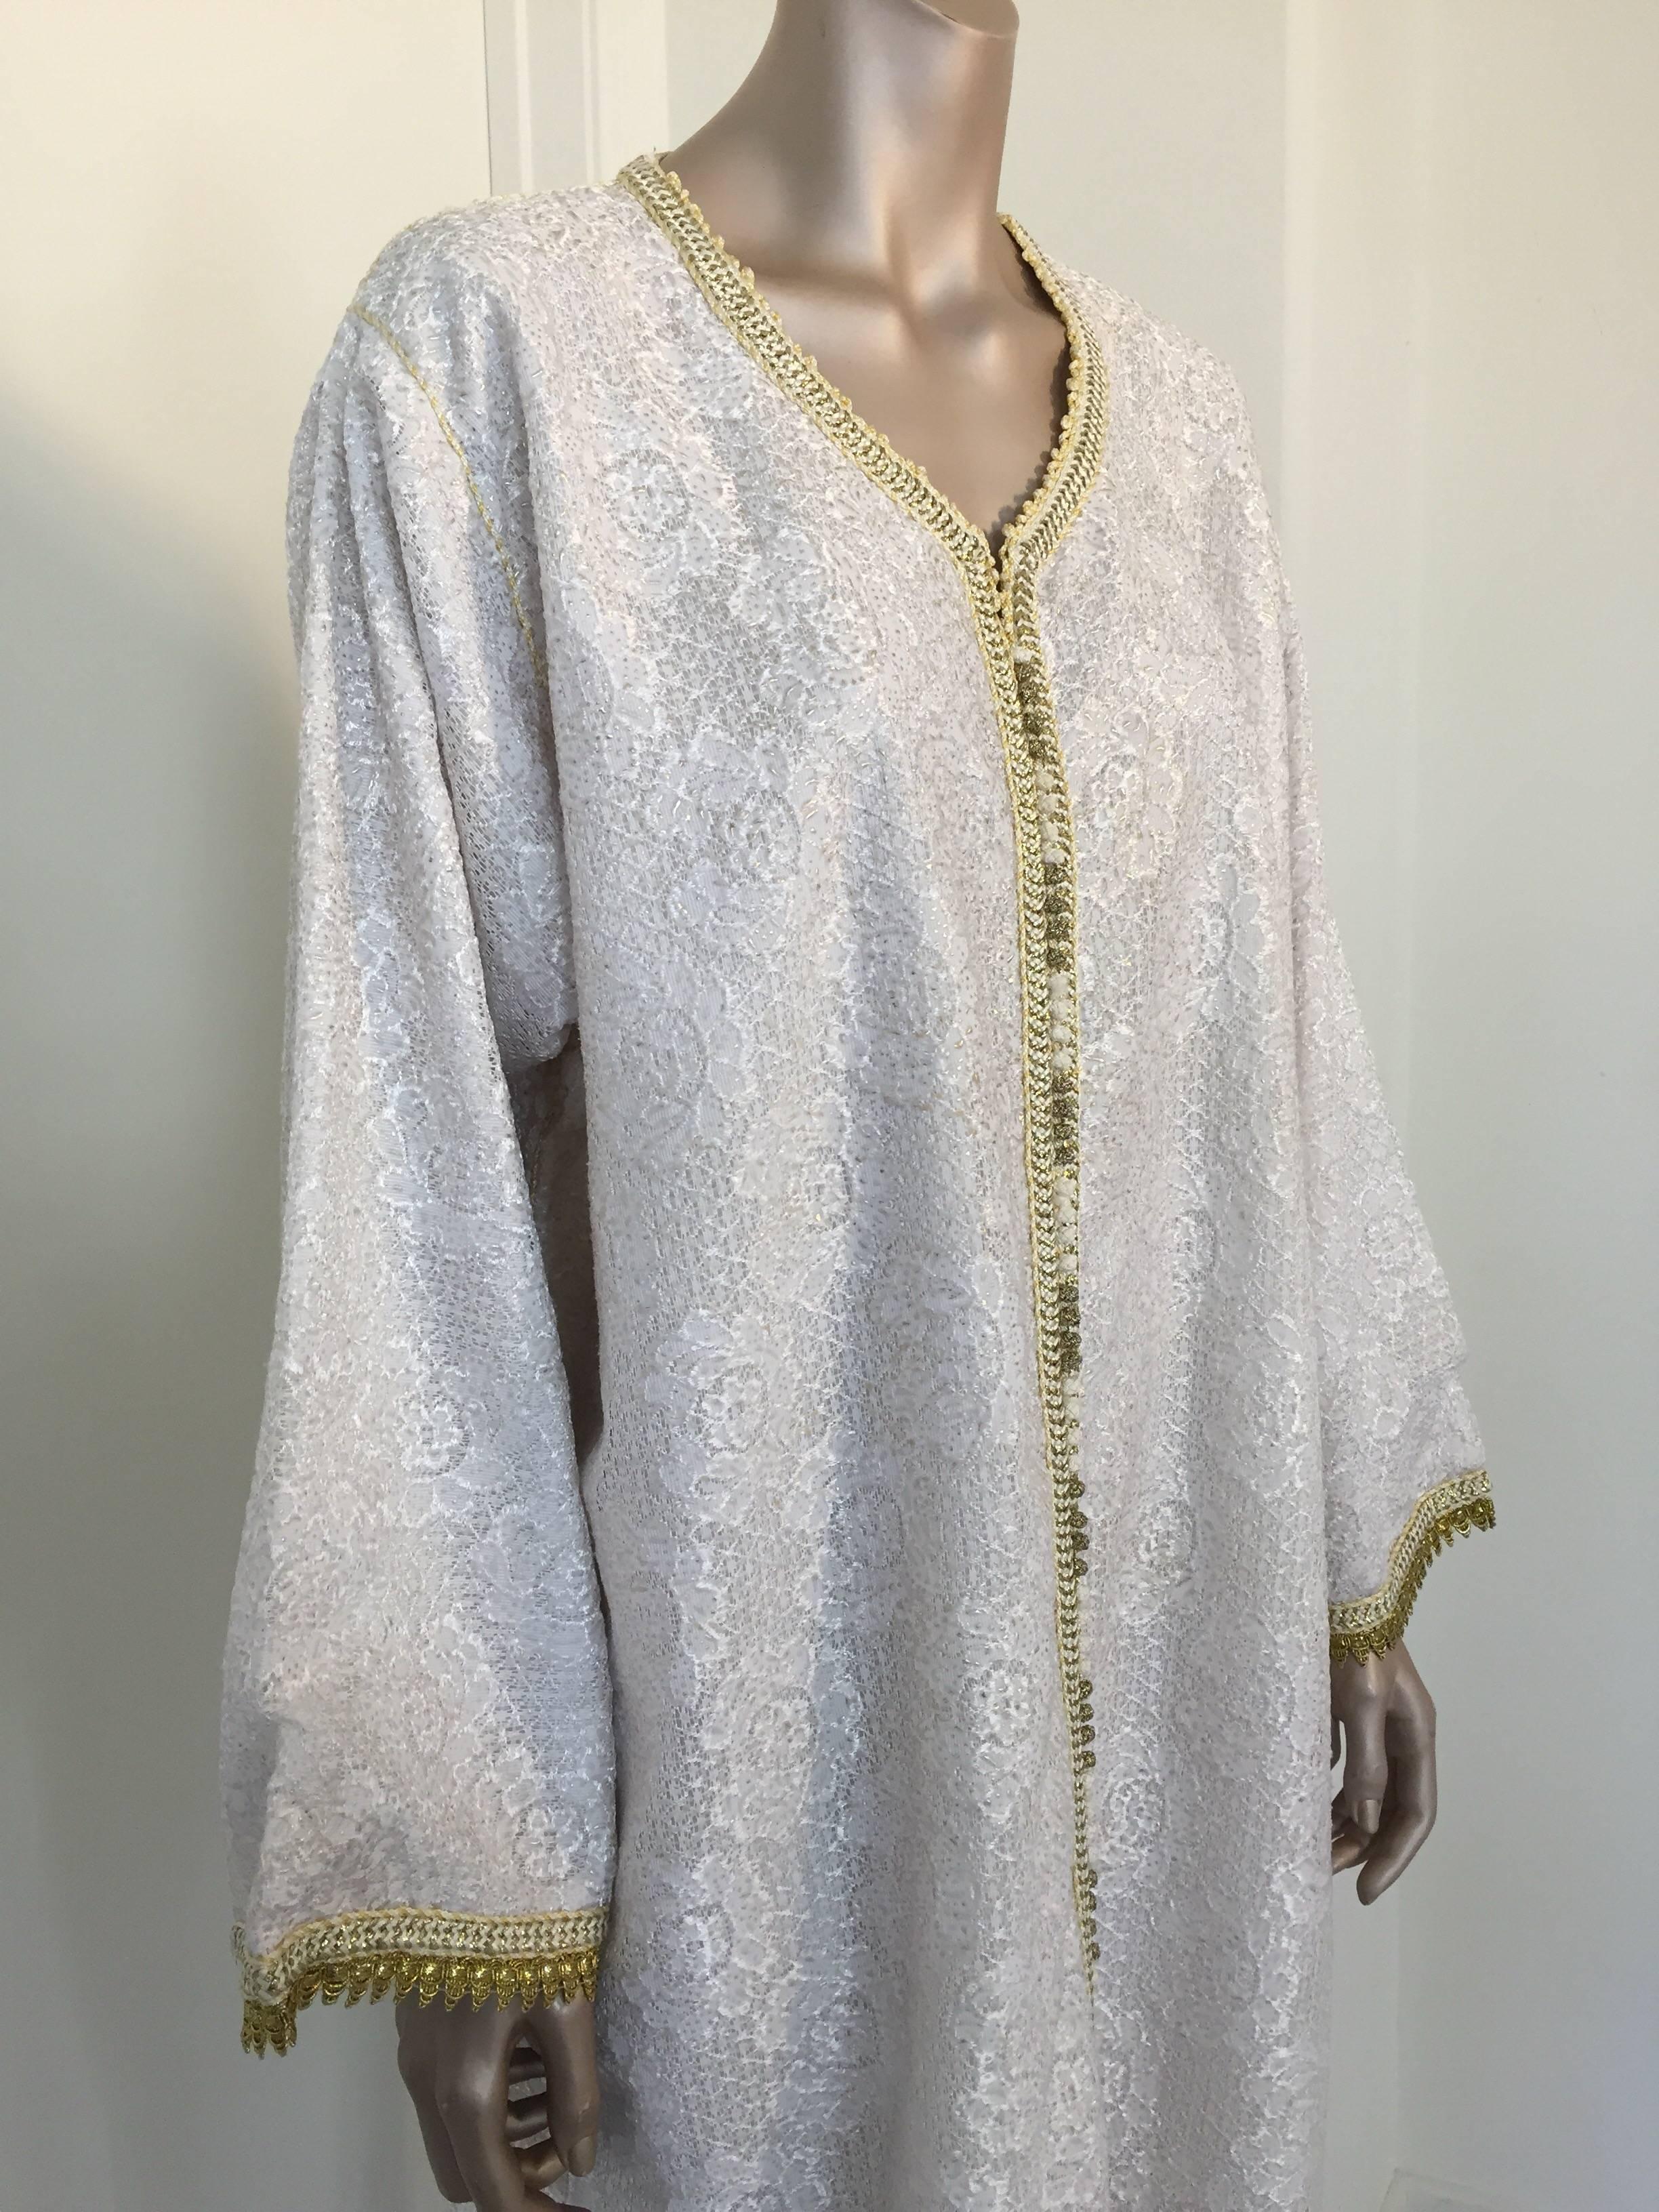 Moroccan Vintage Caftan in White and Gold Lace 1970s Kaftan Maxi Dress Large In Excellent Condition For Sale In North Hollywood, CA